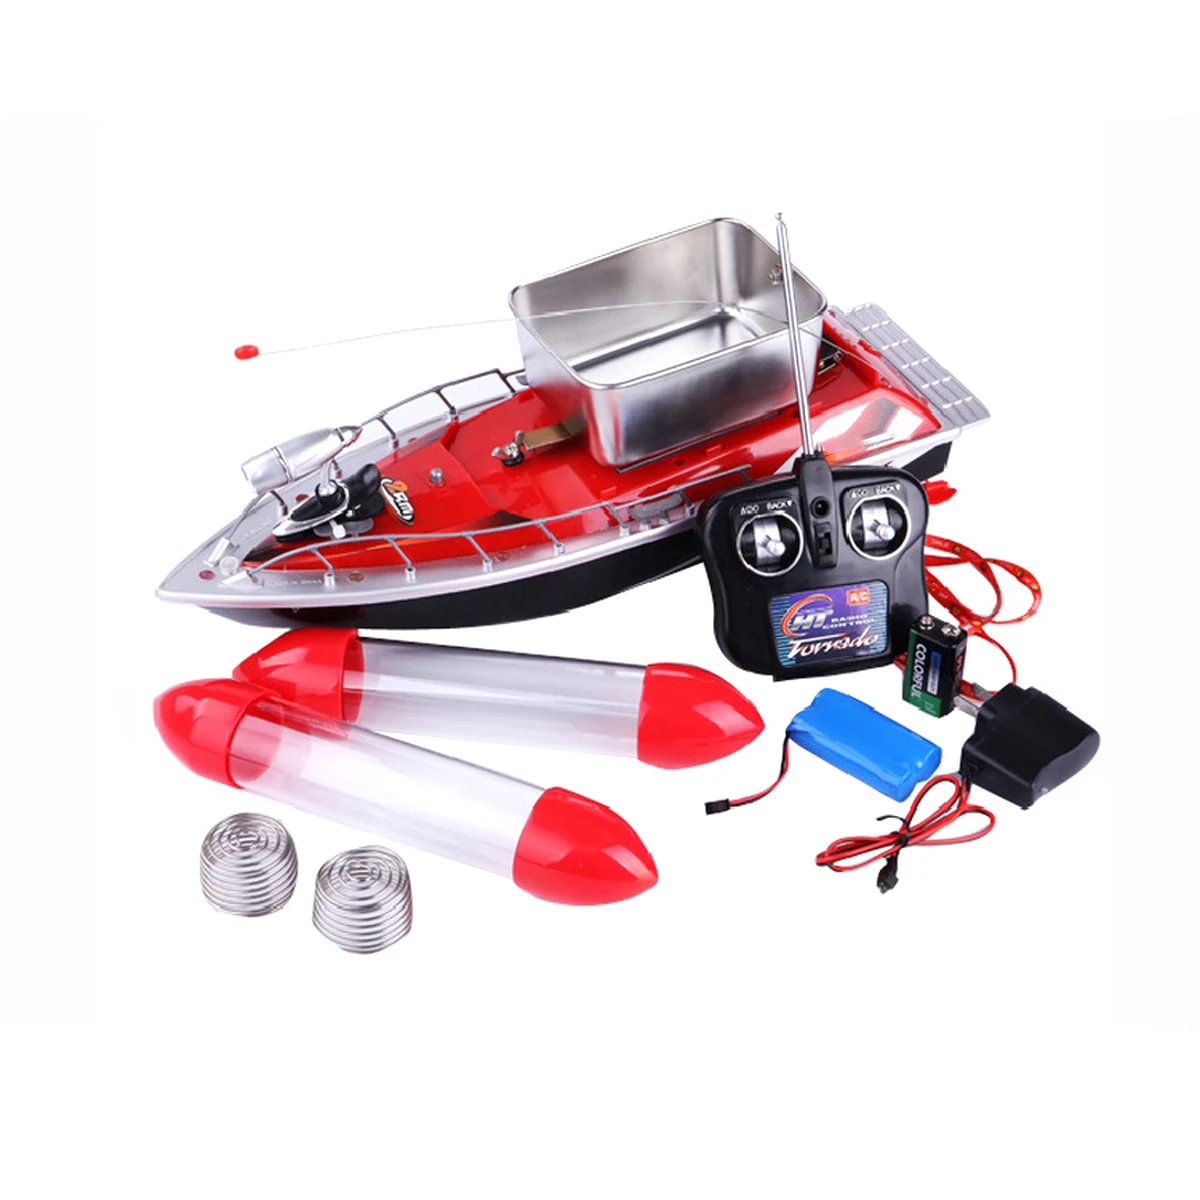 

Mini Electric Wireless Rc Fishing Boat Fish Finder Ship Remote Control Bait Boats Rc lure boat Speedboat With EU US UK Charger